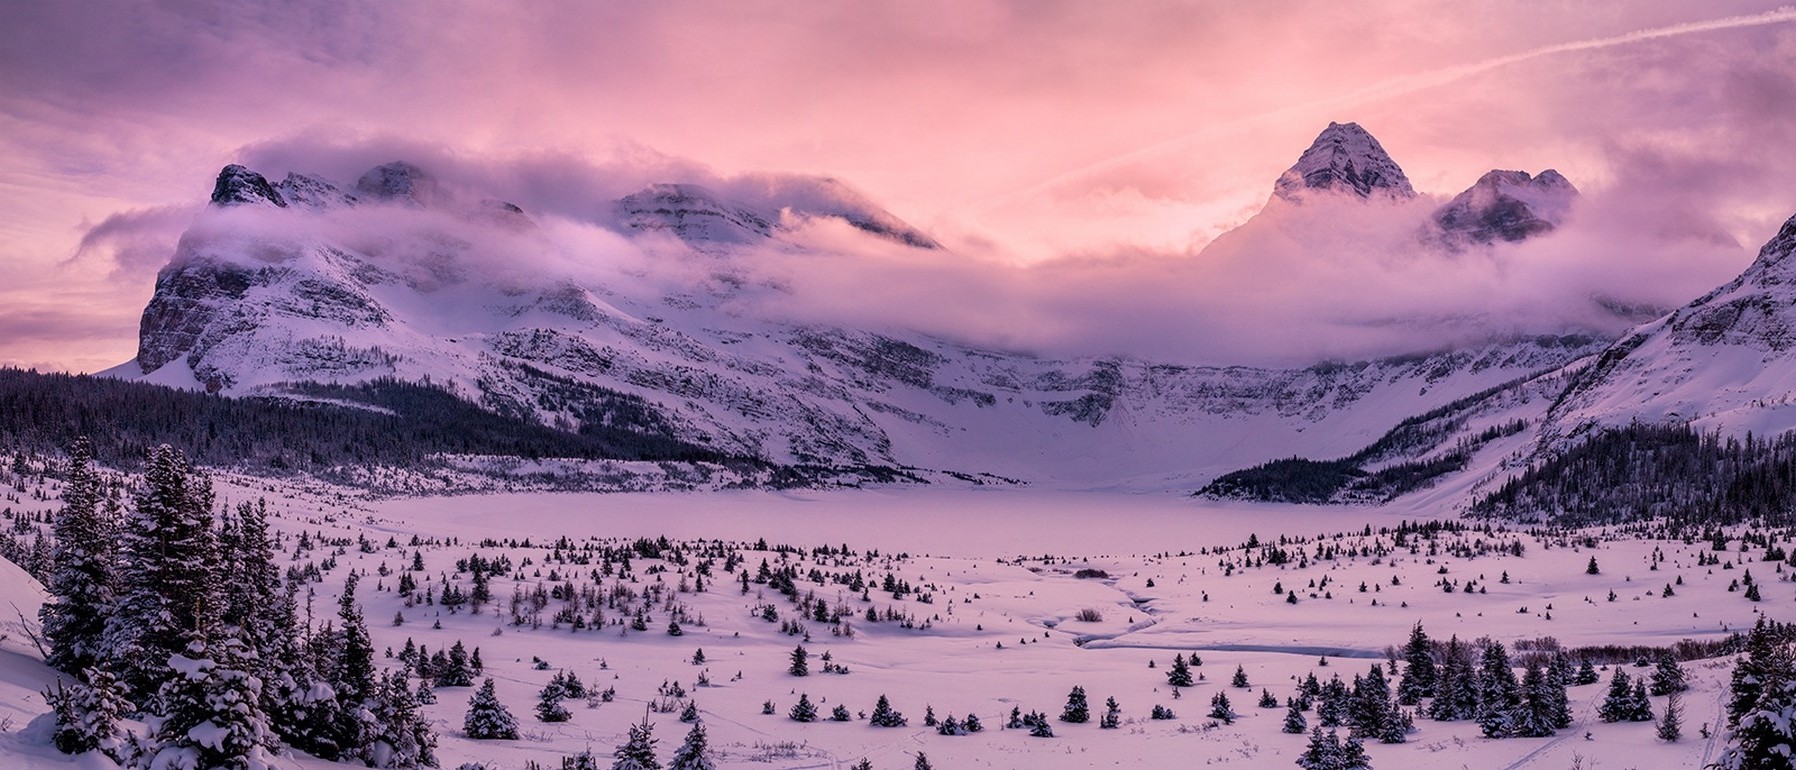 photography, Landscape, Nature, Mountains, Panorama, Winter, Forest, Snow, Pink, Clouds, Sunset, Cold, British Columbia, Canada Wallpaper